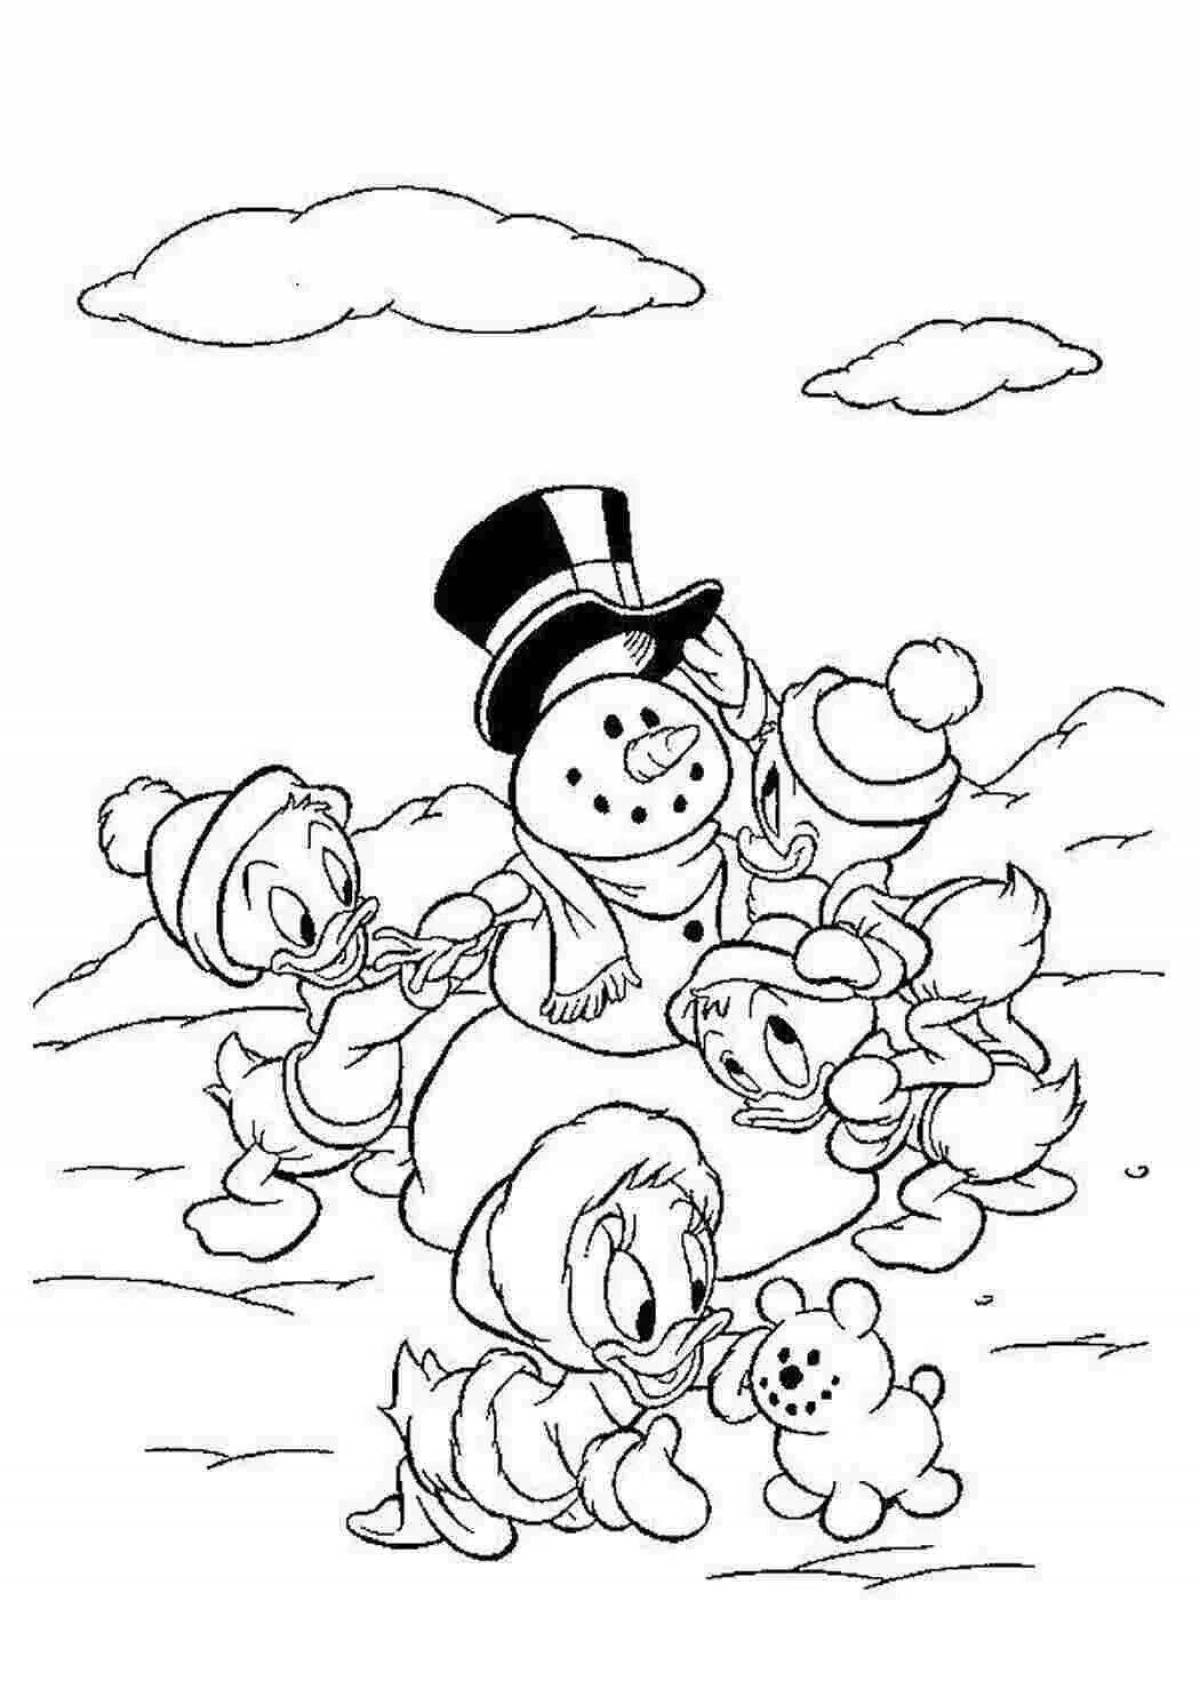 Coloring page marvelous twist mcduck